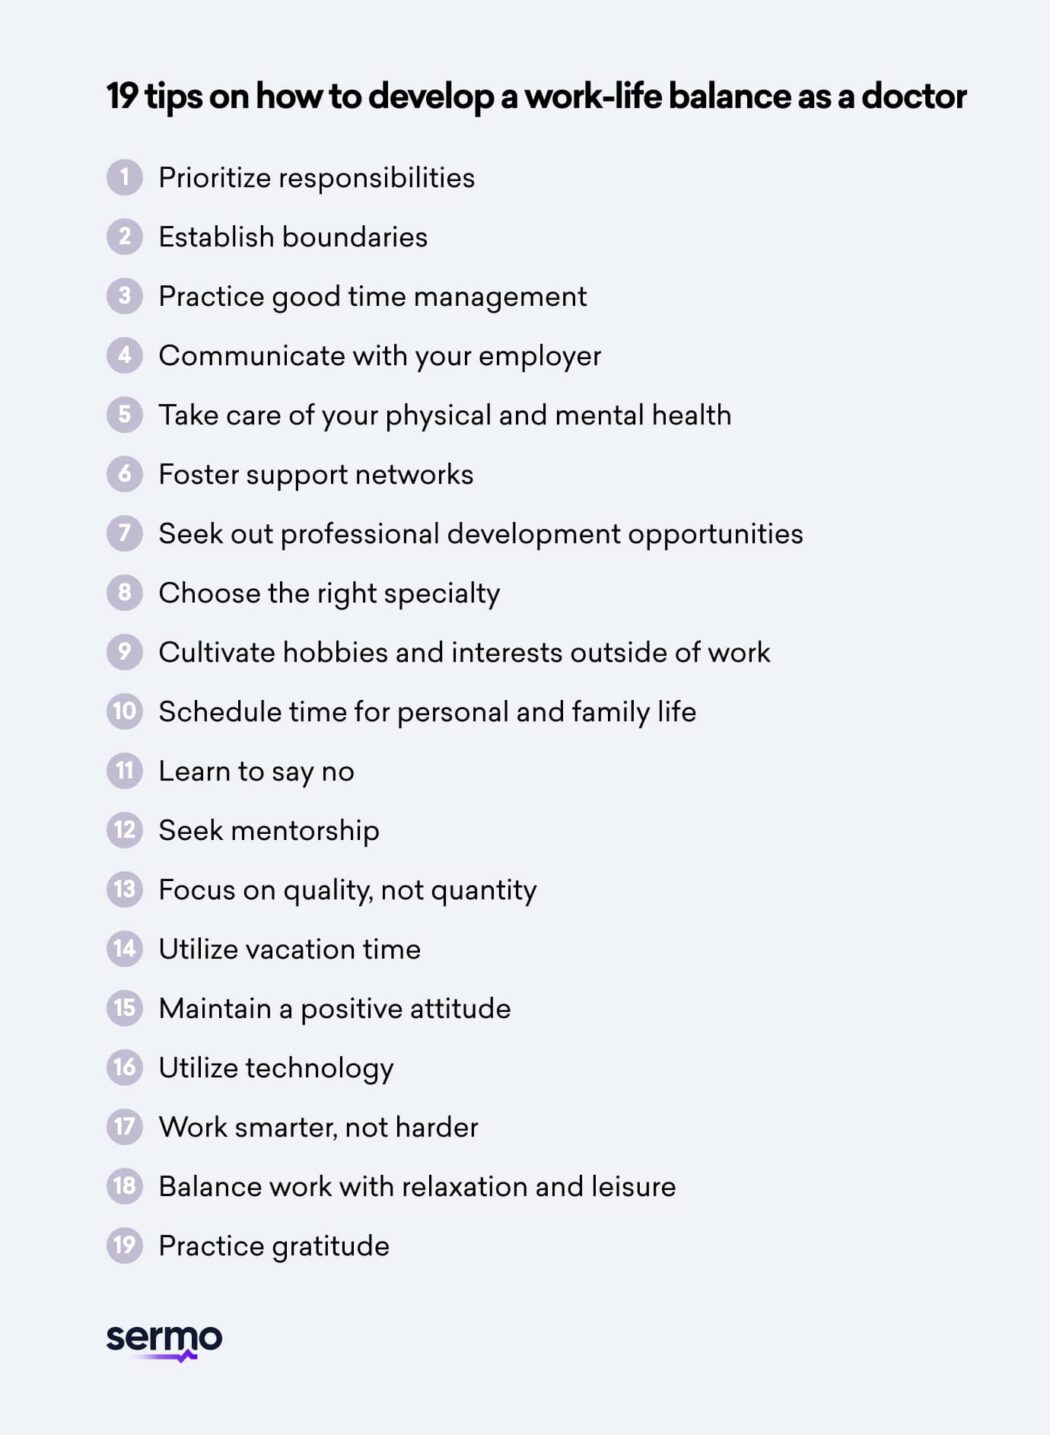 19 tips to develop doctor work life balance according to real physicians on Sermo